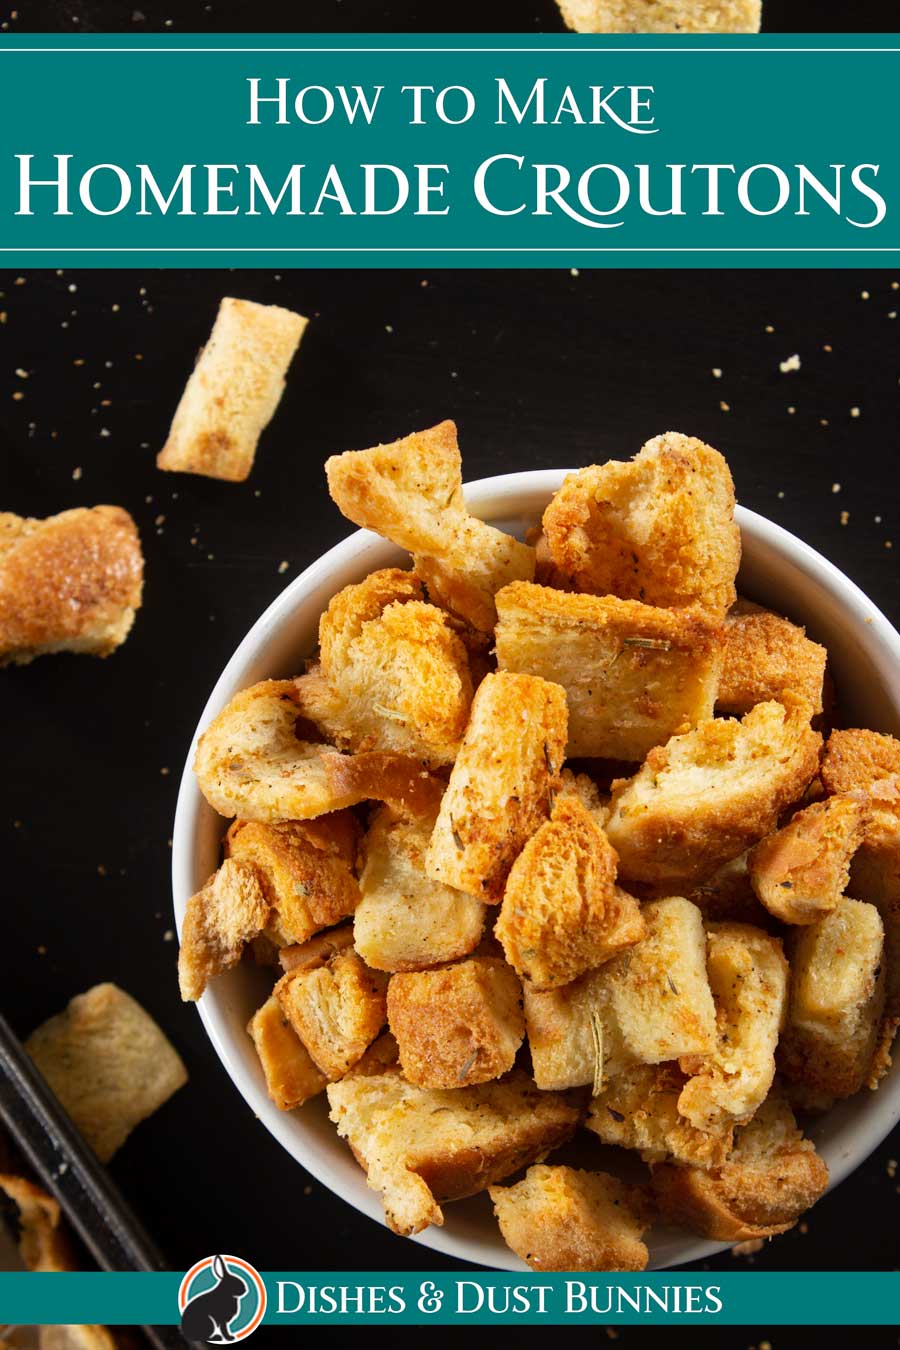 Homemade Croutons in a bowl